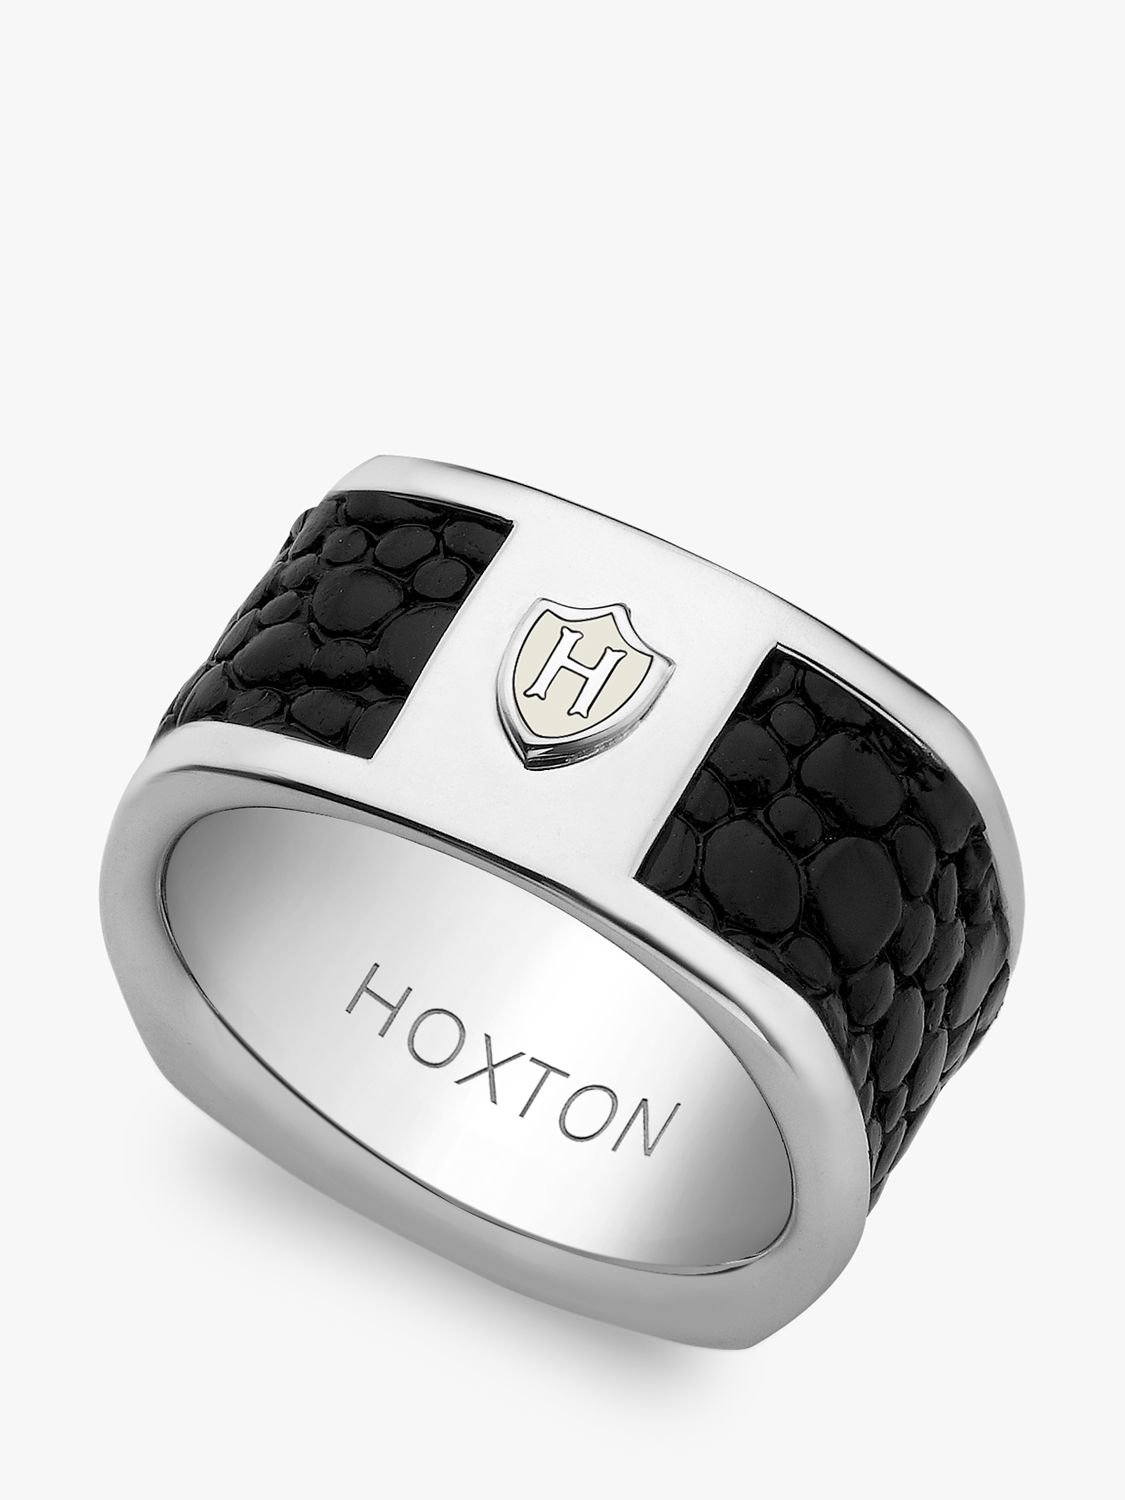 Hoxton London Men's Sterling Silver Black Printed Leather Inlay Ring, Silver/Black, R1/2